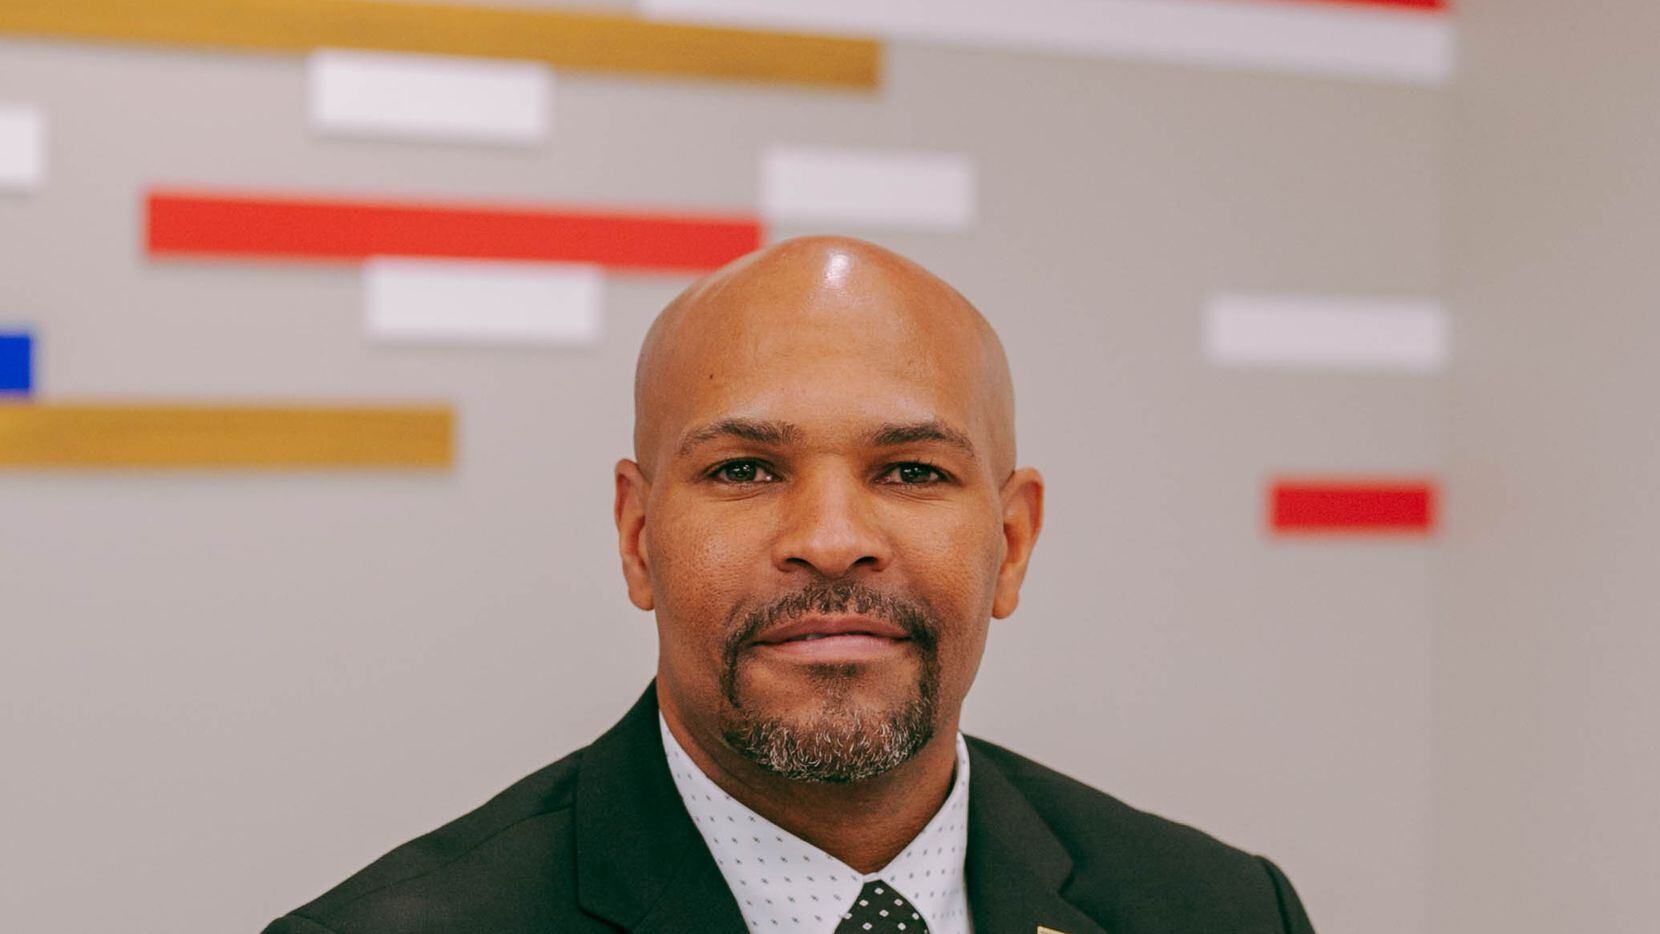 Former Surgeon General Dr. Jerome Adams met Tuesday with students and donors at Southern Methodist University in Dallas and spoke as part of a university lecture series.